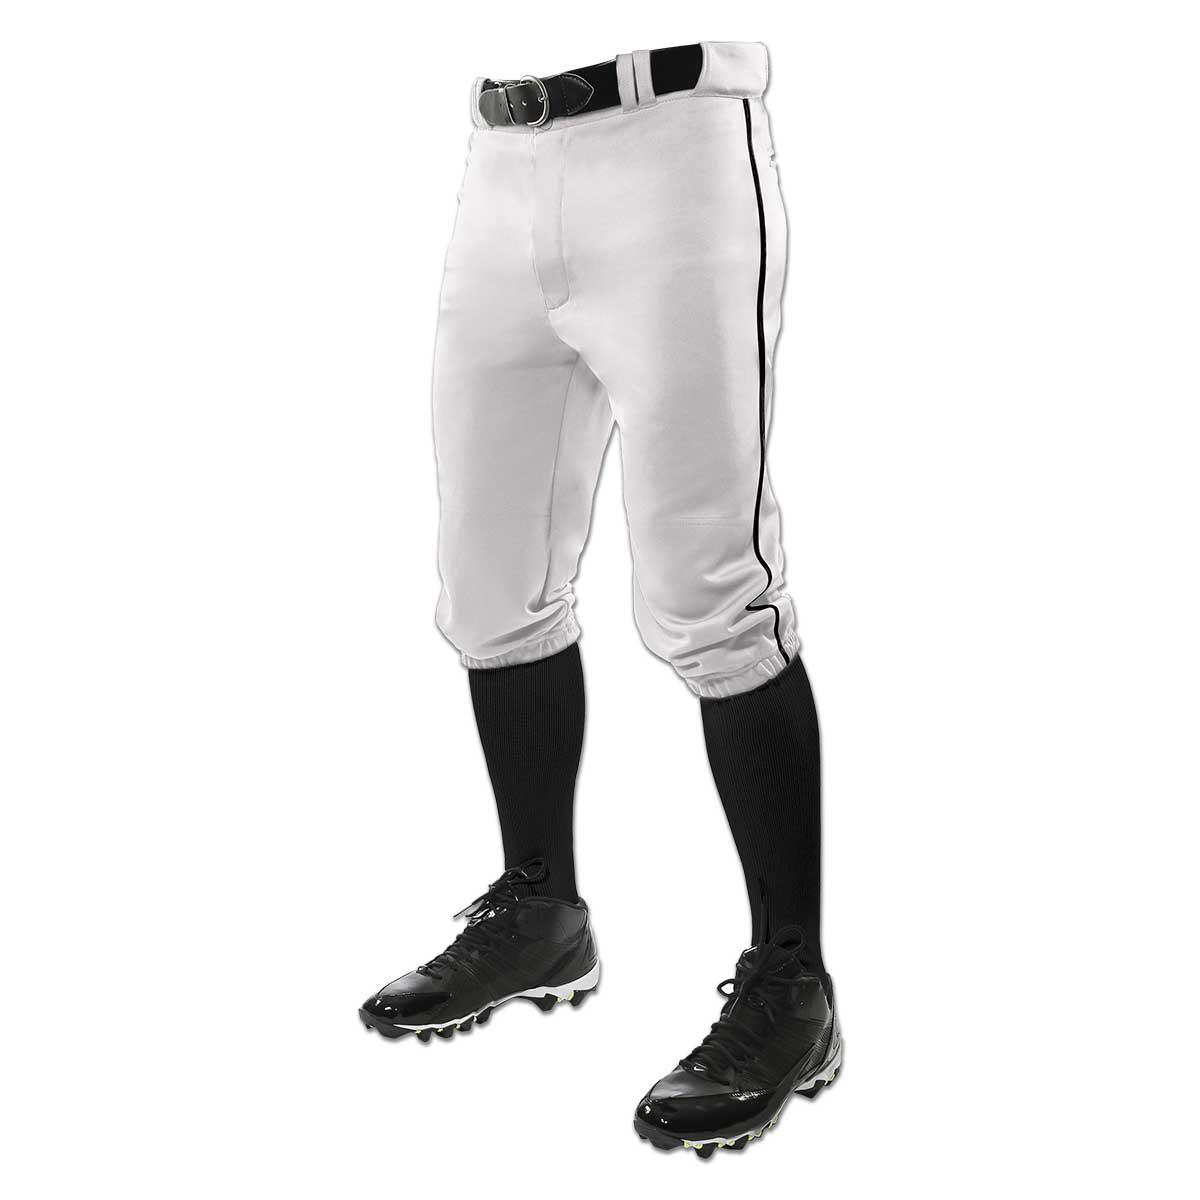 Knicker Knee Length Baseball Pant With Piping WHITE BODY, BLACK PIPE